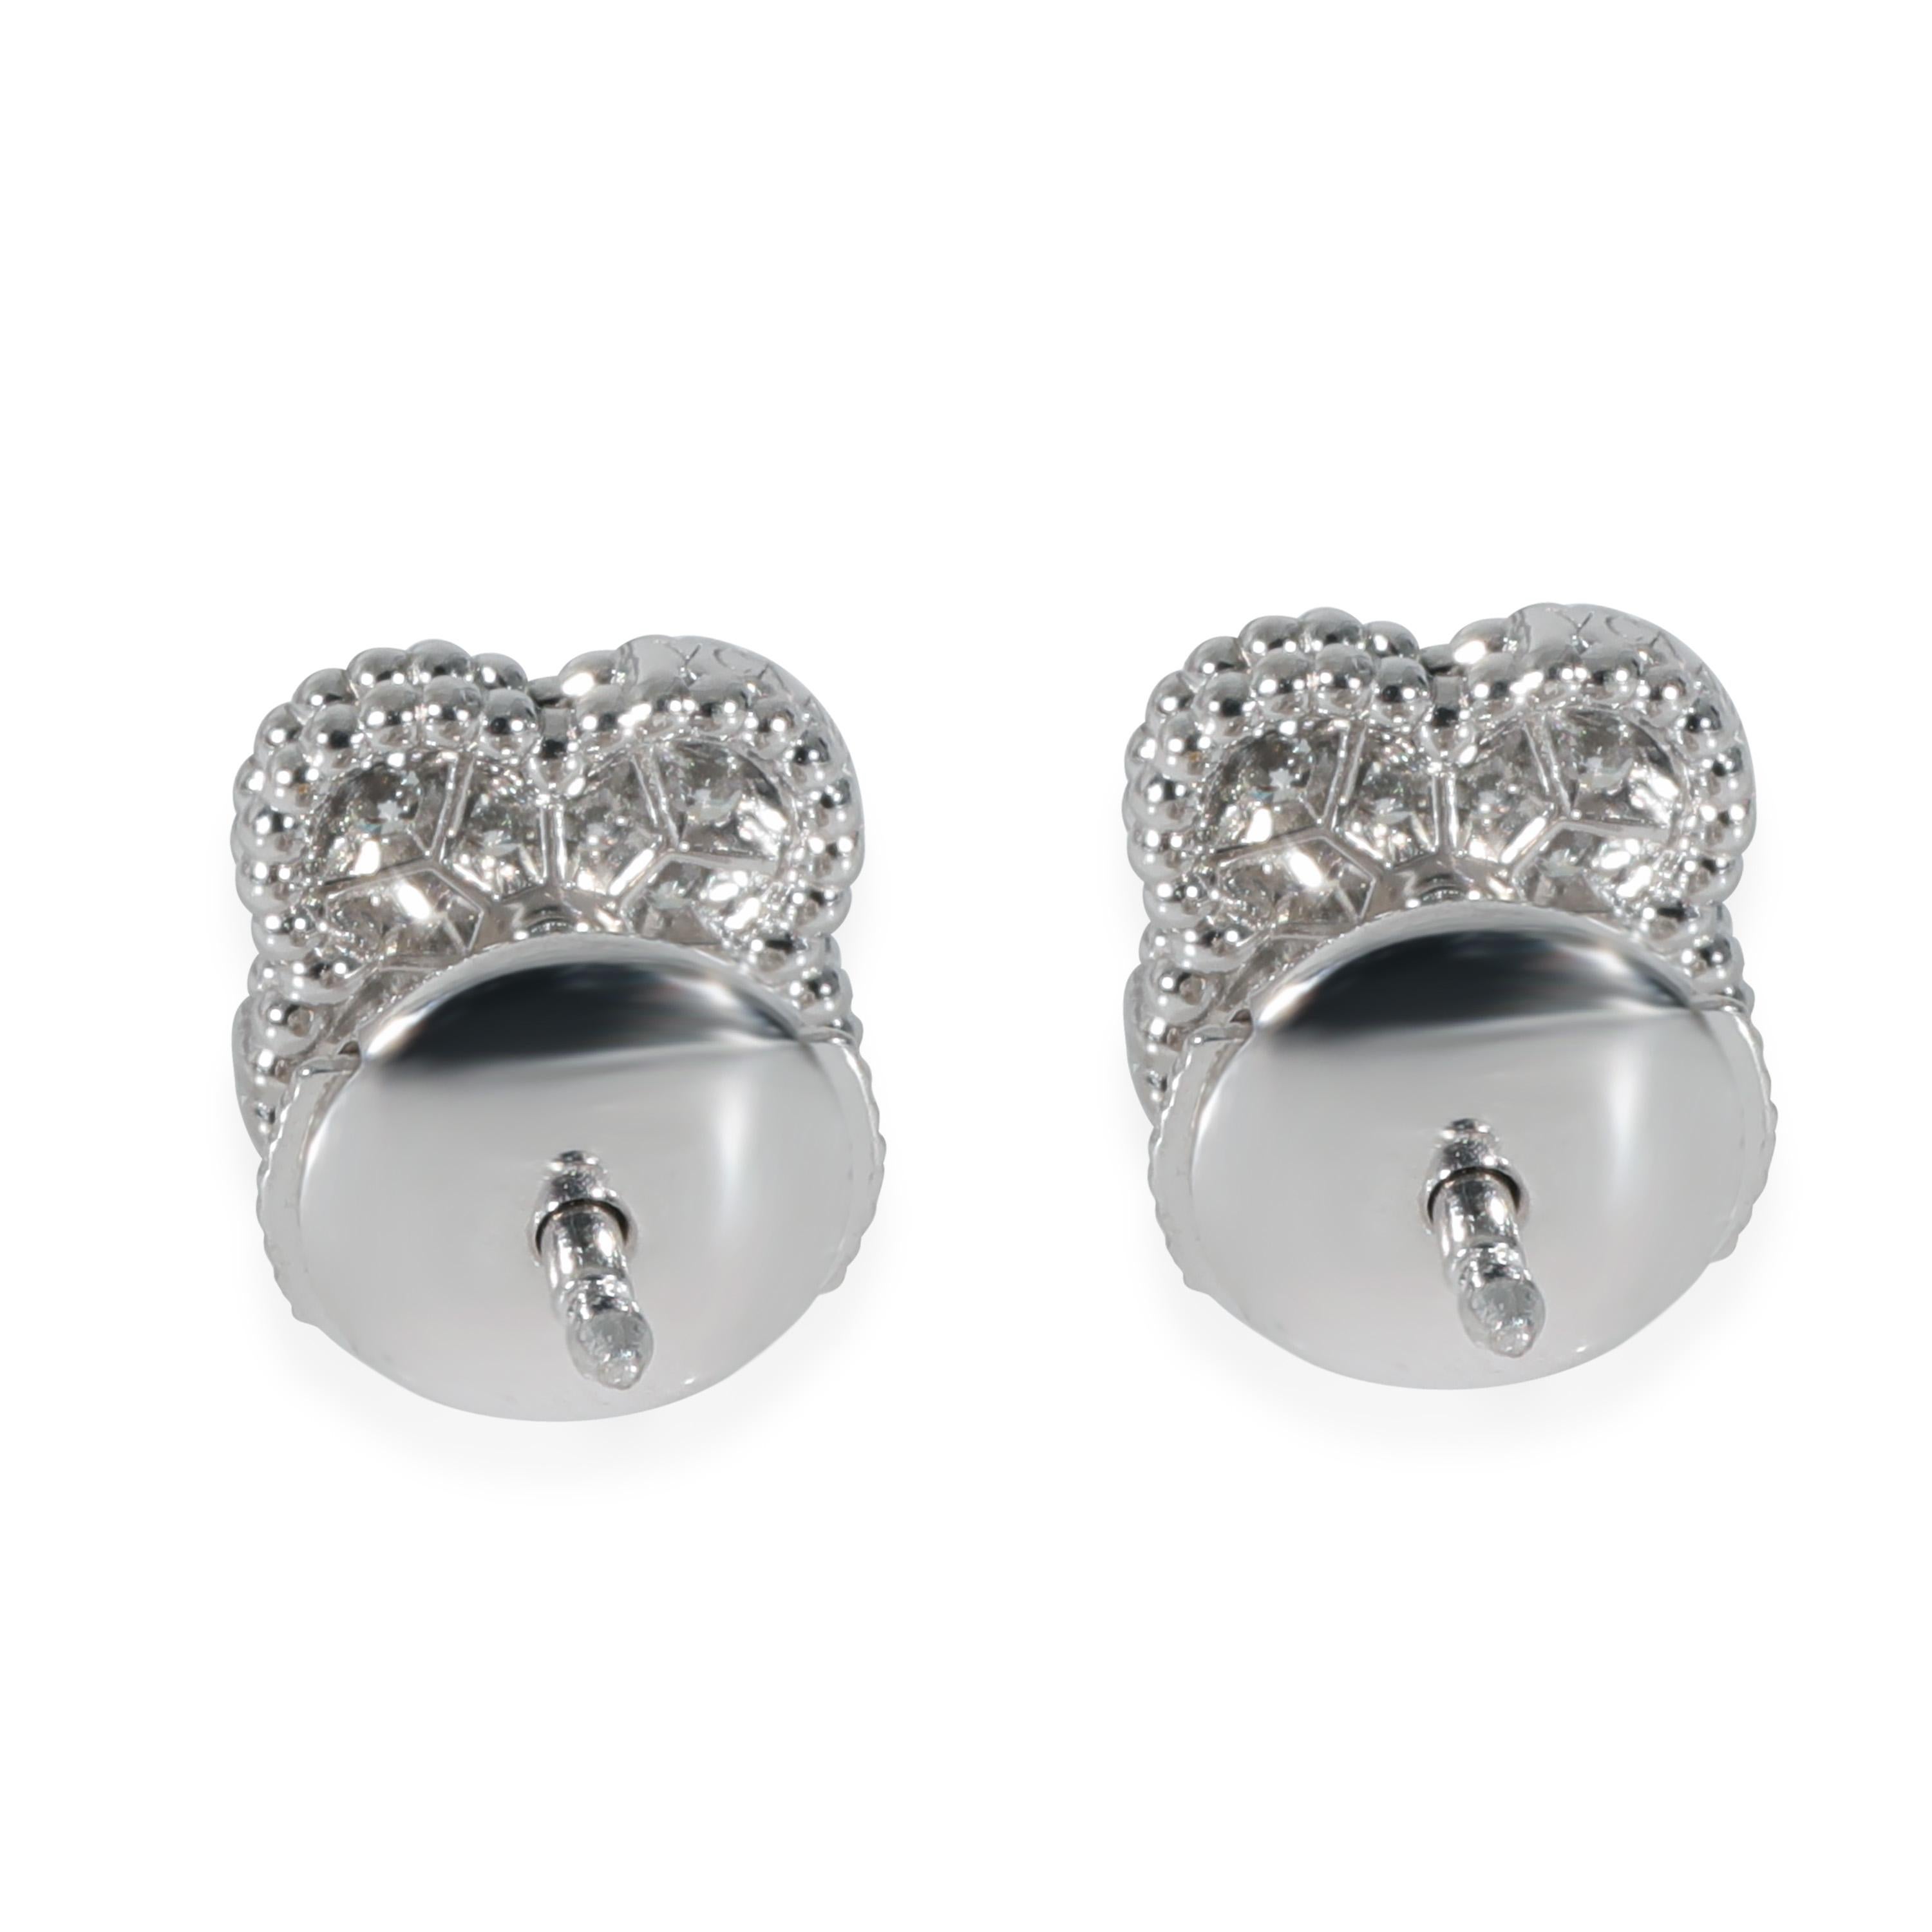 Van Cleef & Arpels Sweet Alhambra Diamond Earrings in 18k White Gold 0.16 CTW

PRIMARY DETAILS
SKU: 130126
Listing Title: Van Cleef & Arpels Sweet Alhambra Diamond Earrings in 18k White Gold 0.16 CTW
Condition Description: Launched in 1968, the